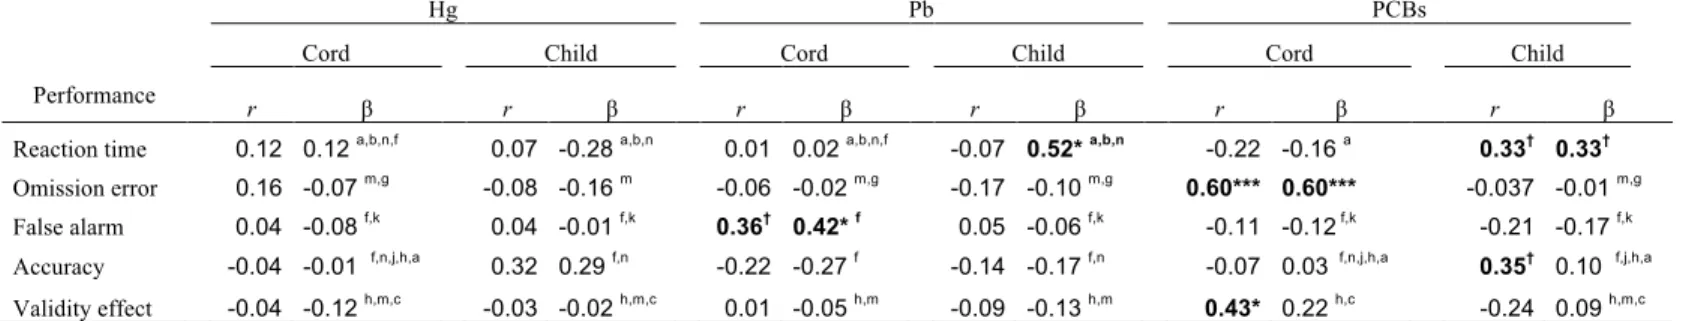 Table  2.  Associations between contaminant concentrations in cord and child blood and  attentional performances 